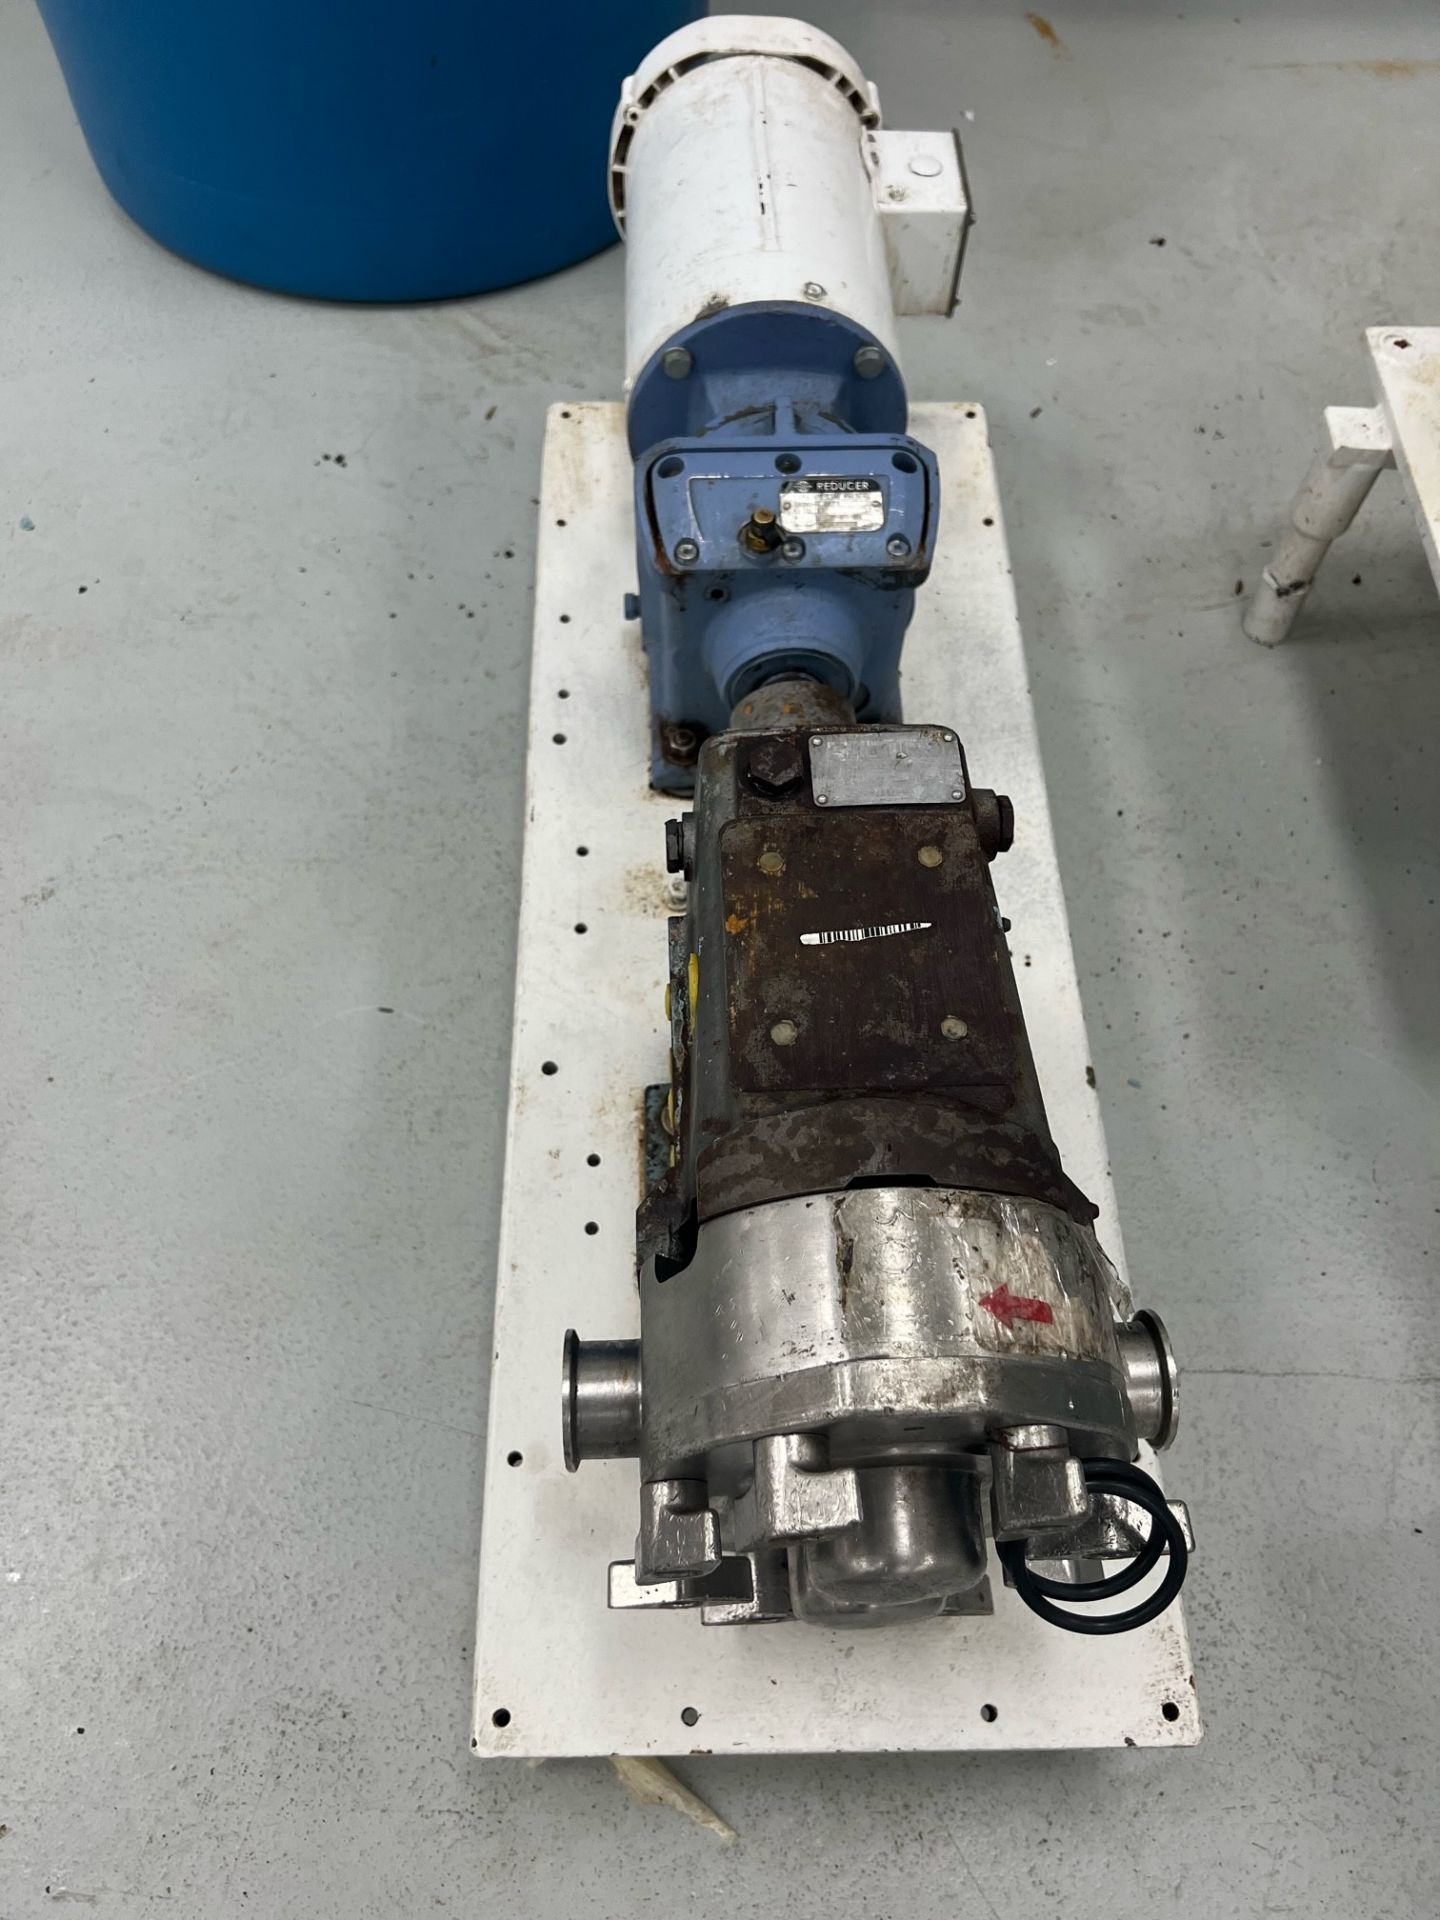 Waukesha M30 Positive Displacement Pump #2 with 2 hp Motor 3 Phase, Brand New, Never Used Since - Image 2 of 3